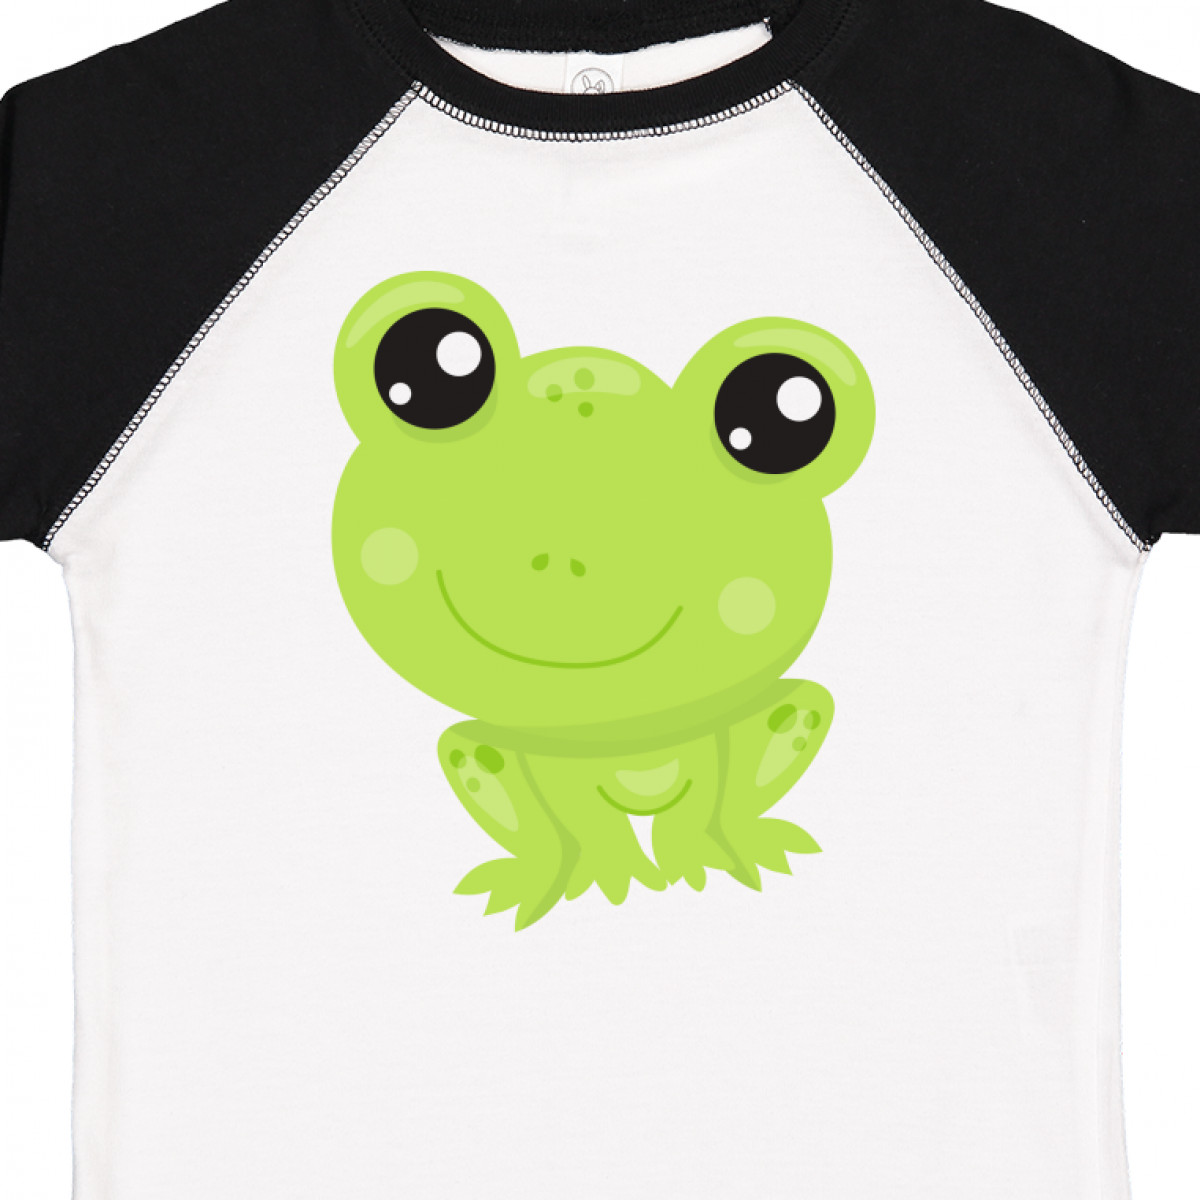 Inktastic Cute Frog, Little Frog, Baby Frog, Green Frog Boys or Girls Toddler T-Shirt - image 3 of 4